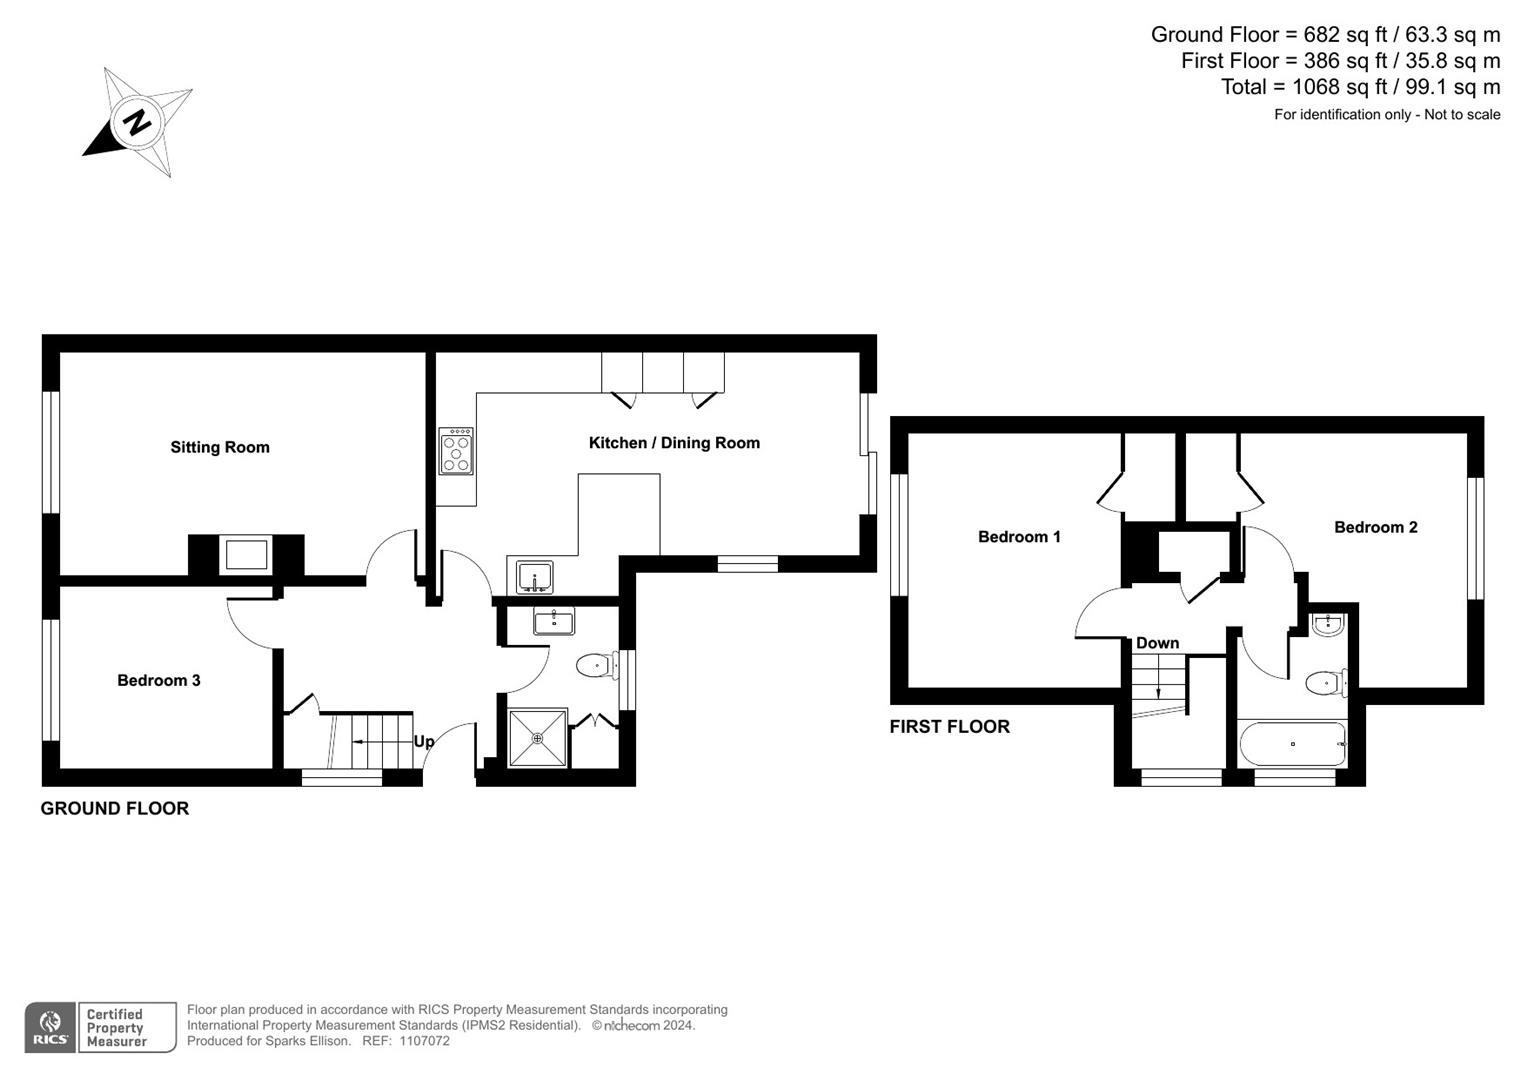 Corinthian Road, Scantabout, Chandlers Ford floorplan